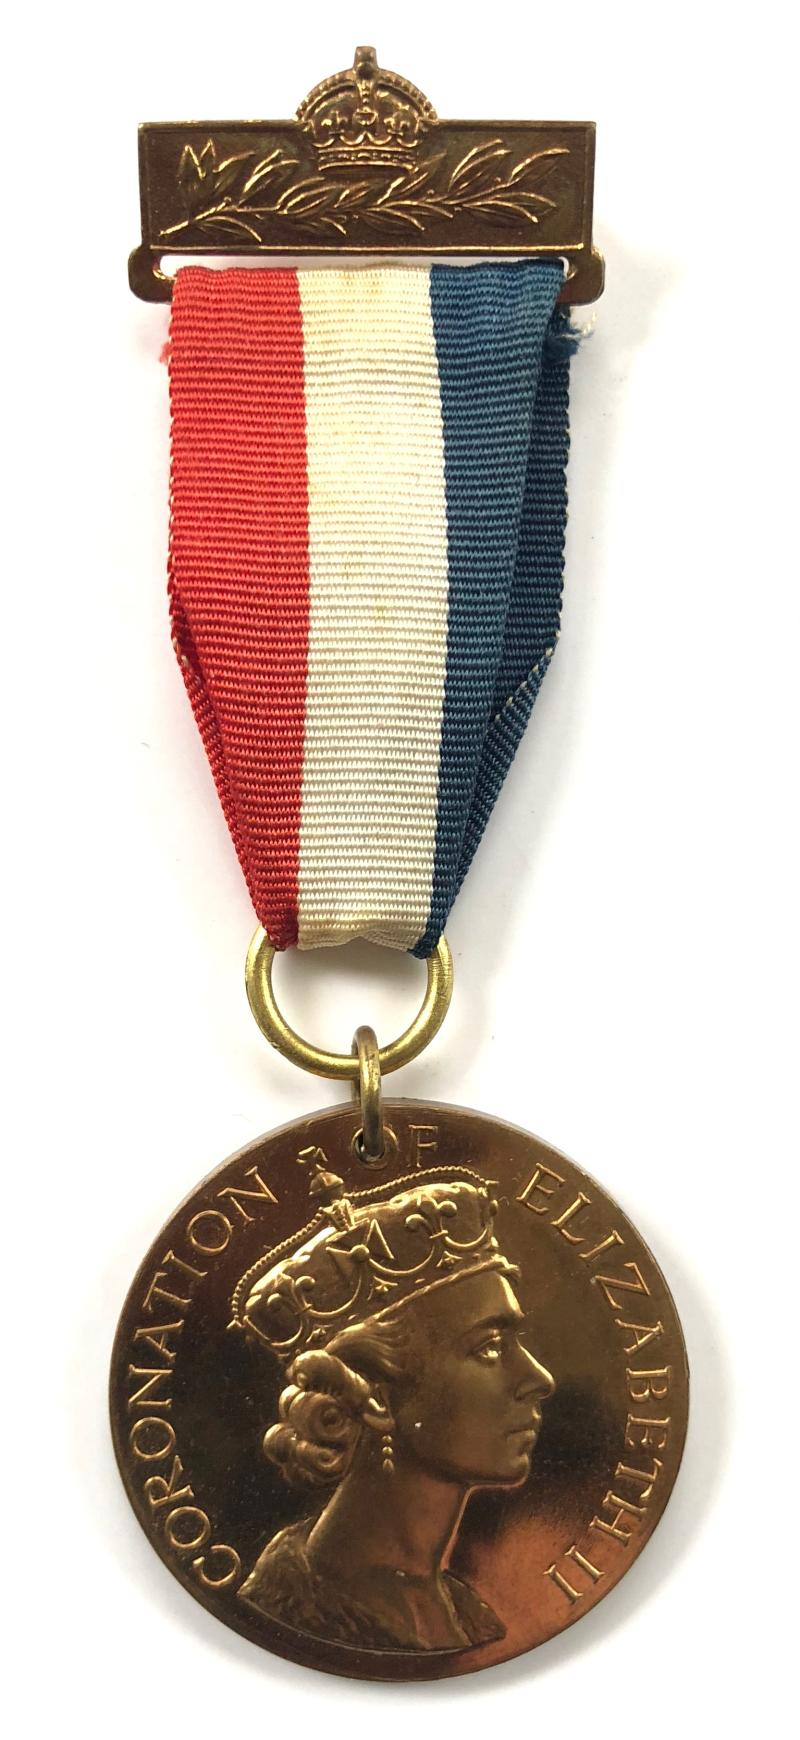 Medal commemorating the Coronation of Elizabeth II 1953 by Pinches London